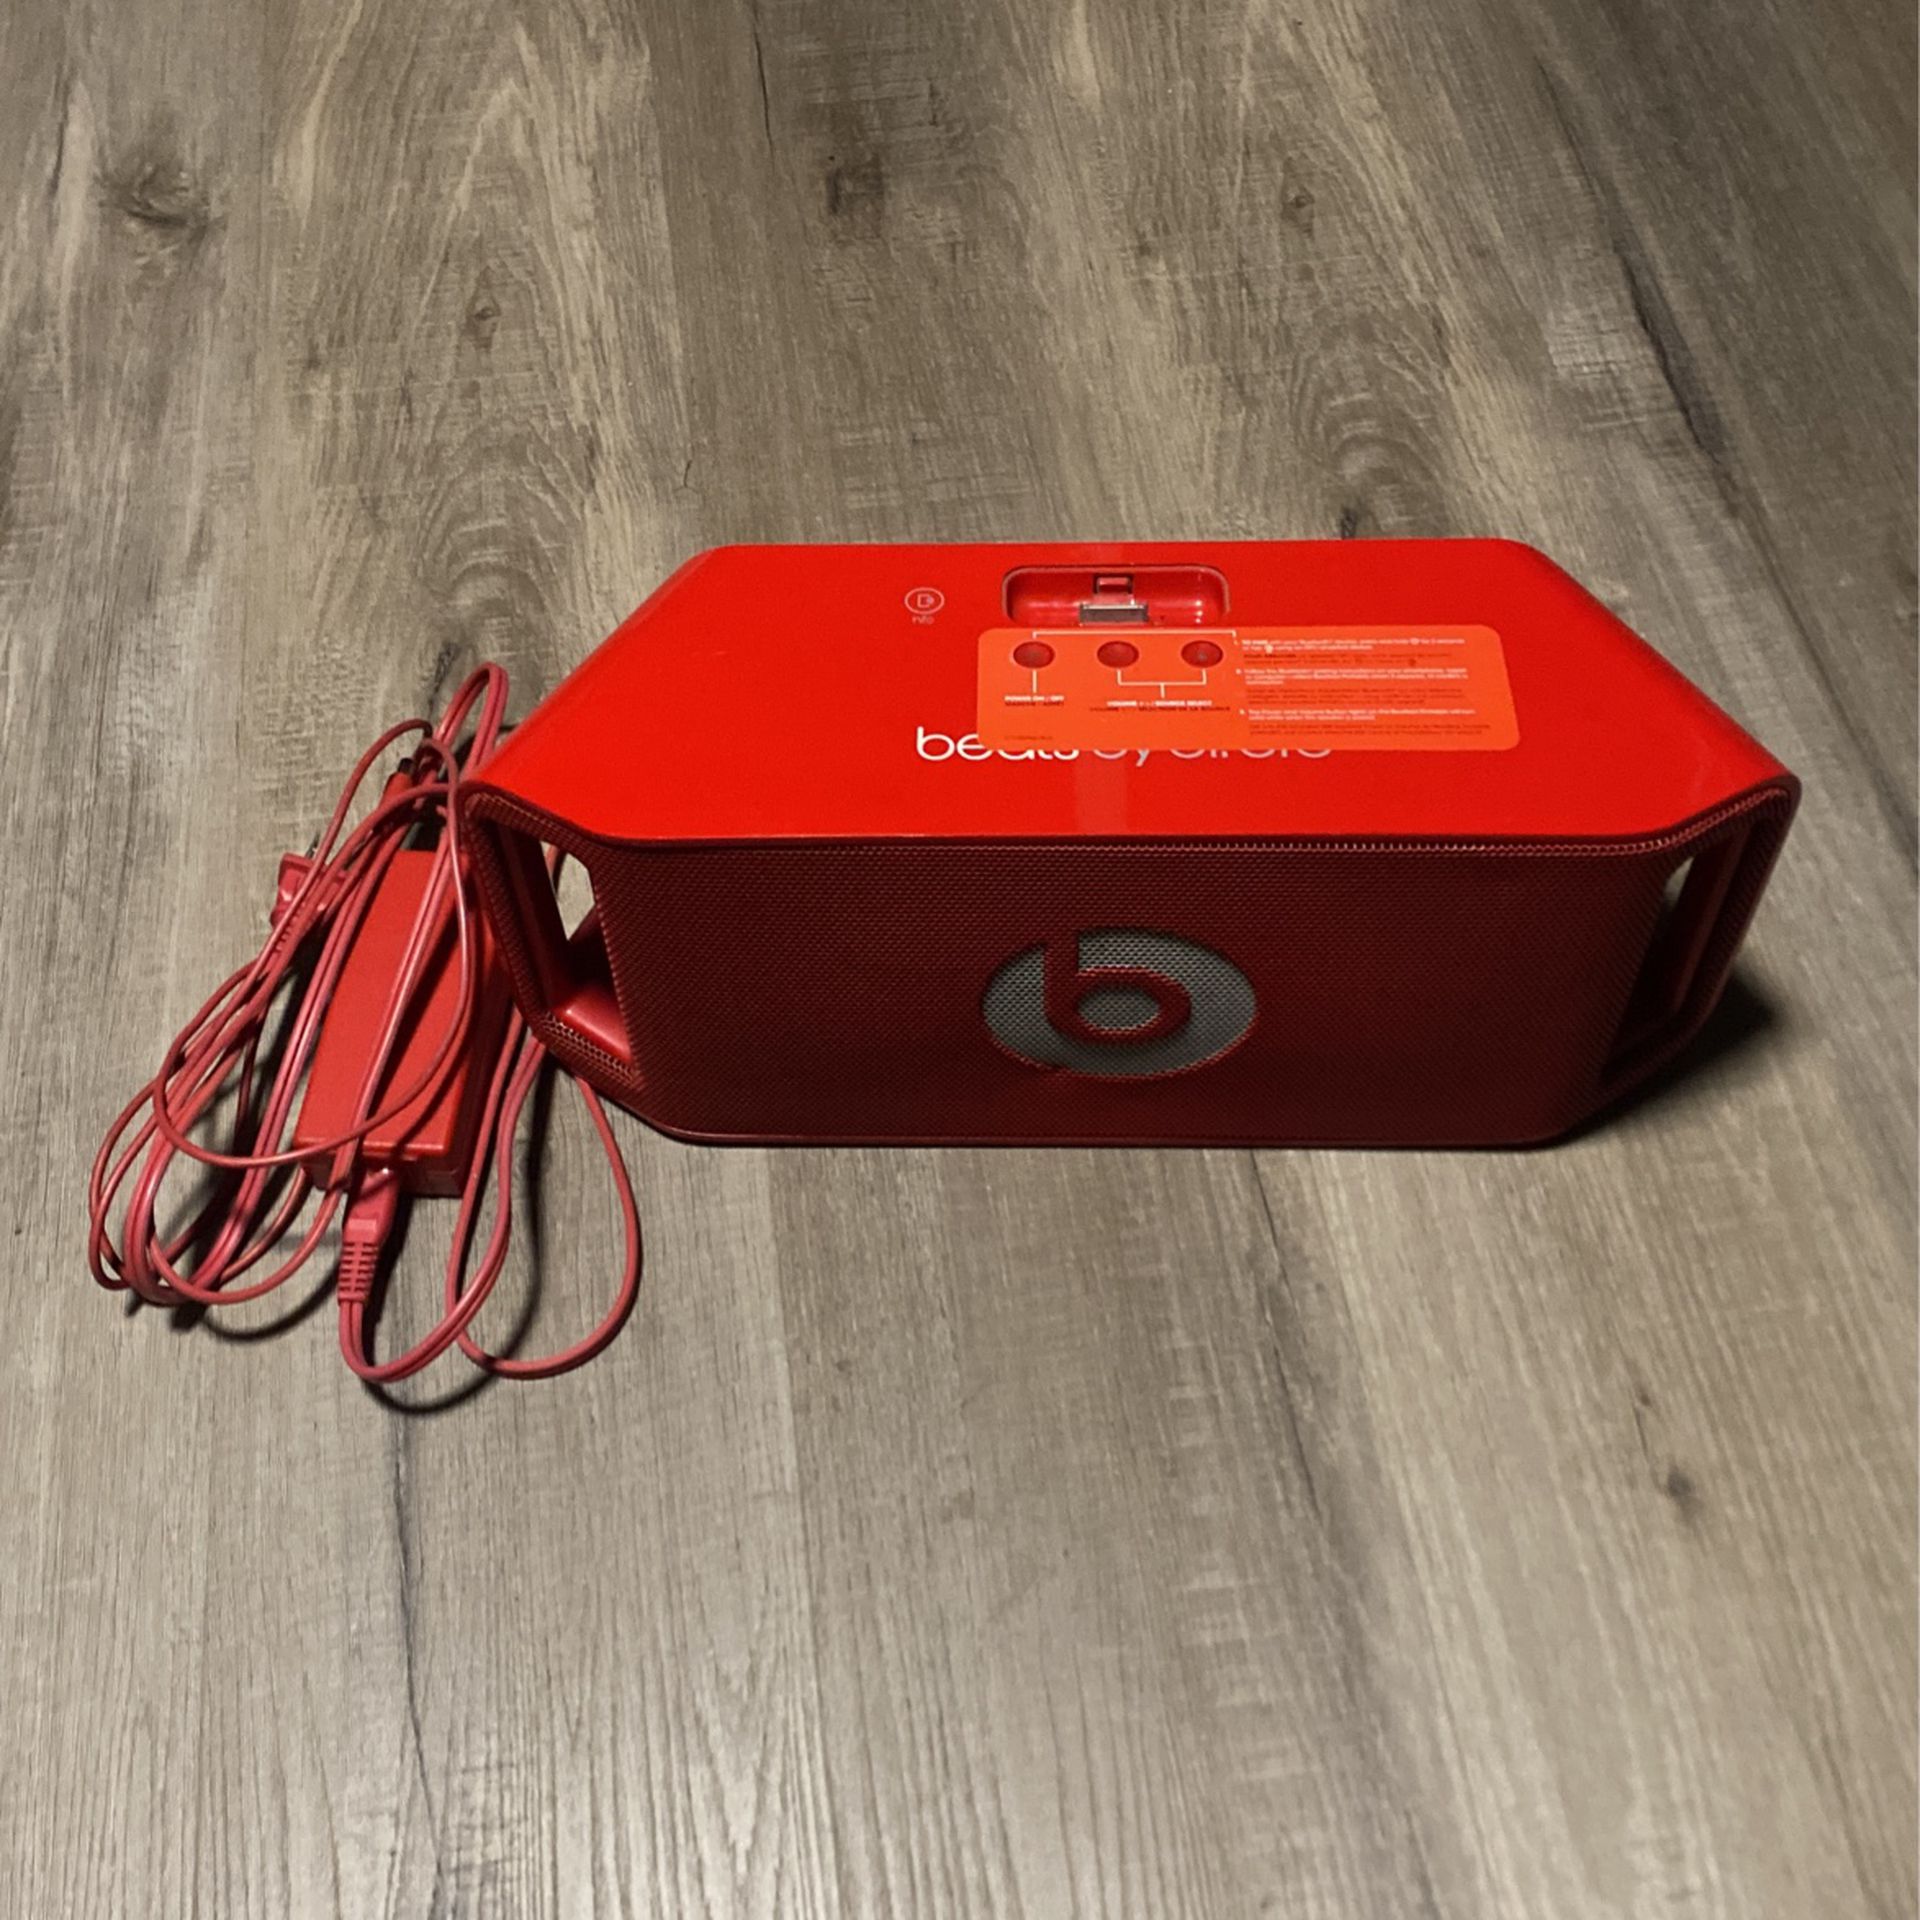 Beats by Dr. Dre Beatbox Portable Lil Wayne (Red)